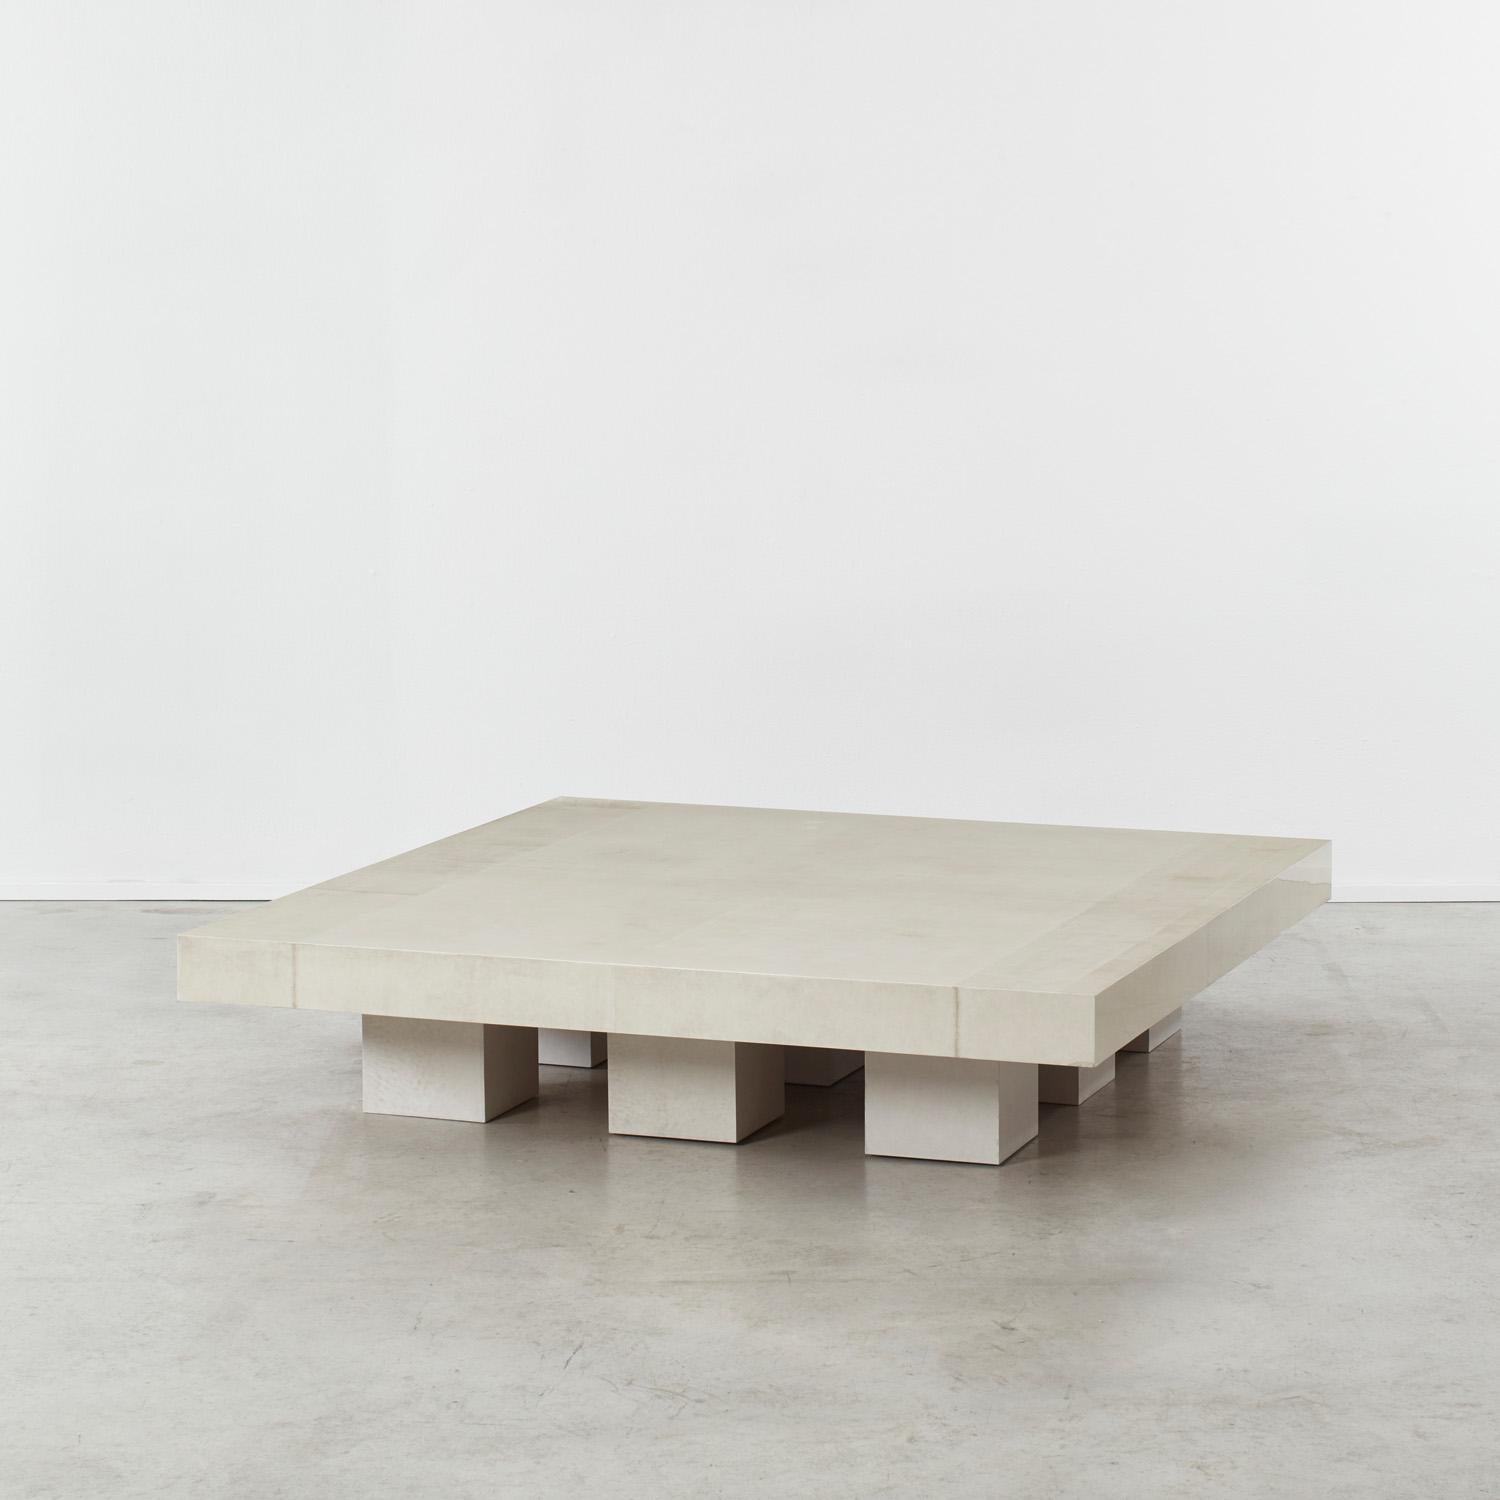 David Horan Paper Coffee Table for Béton Brut, UK, 2022 In New Condition For Sale In London, GB